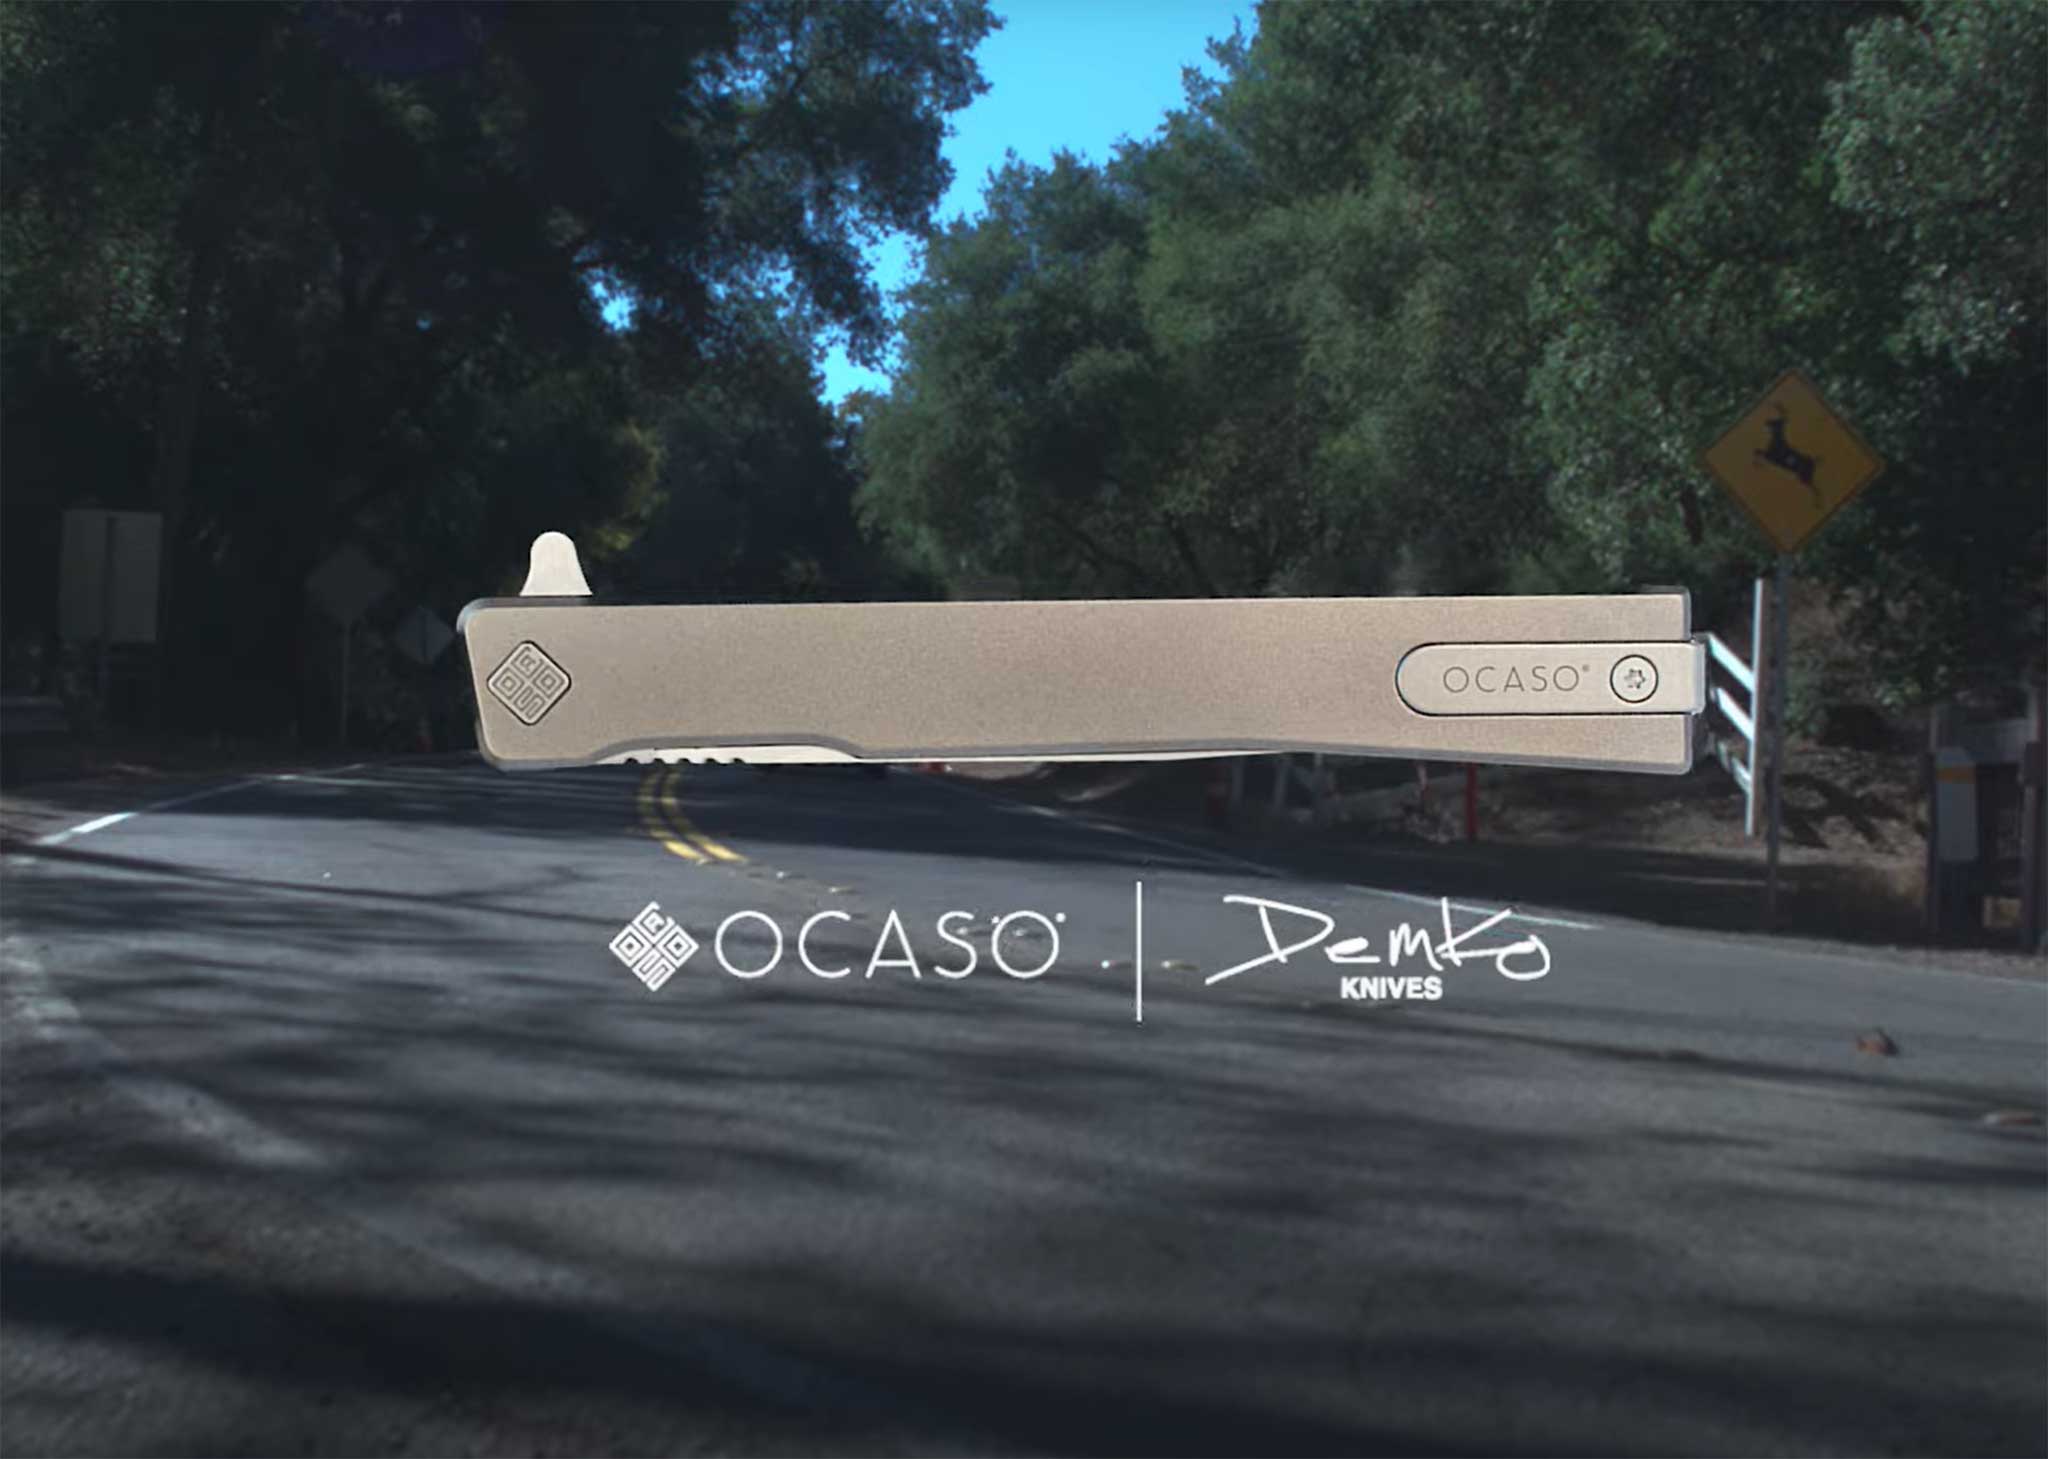 Image of knife overlay on road with logos